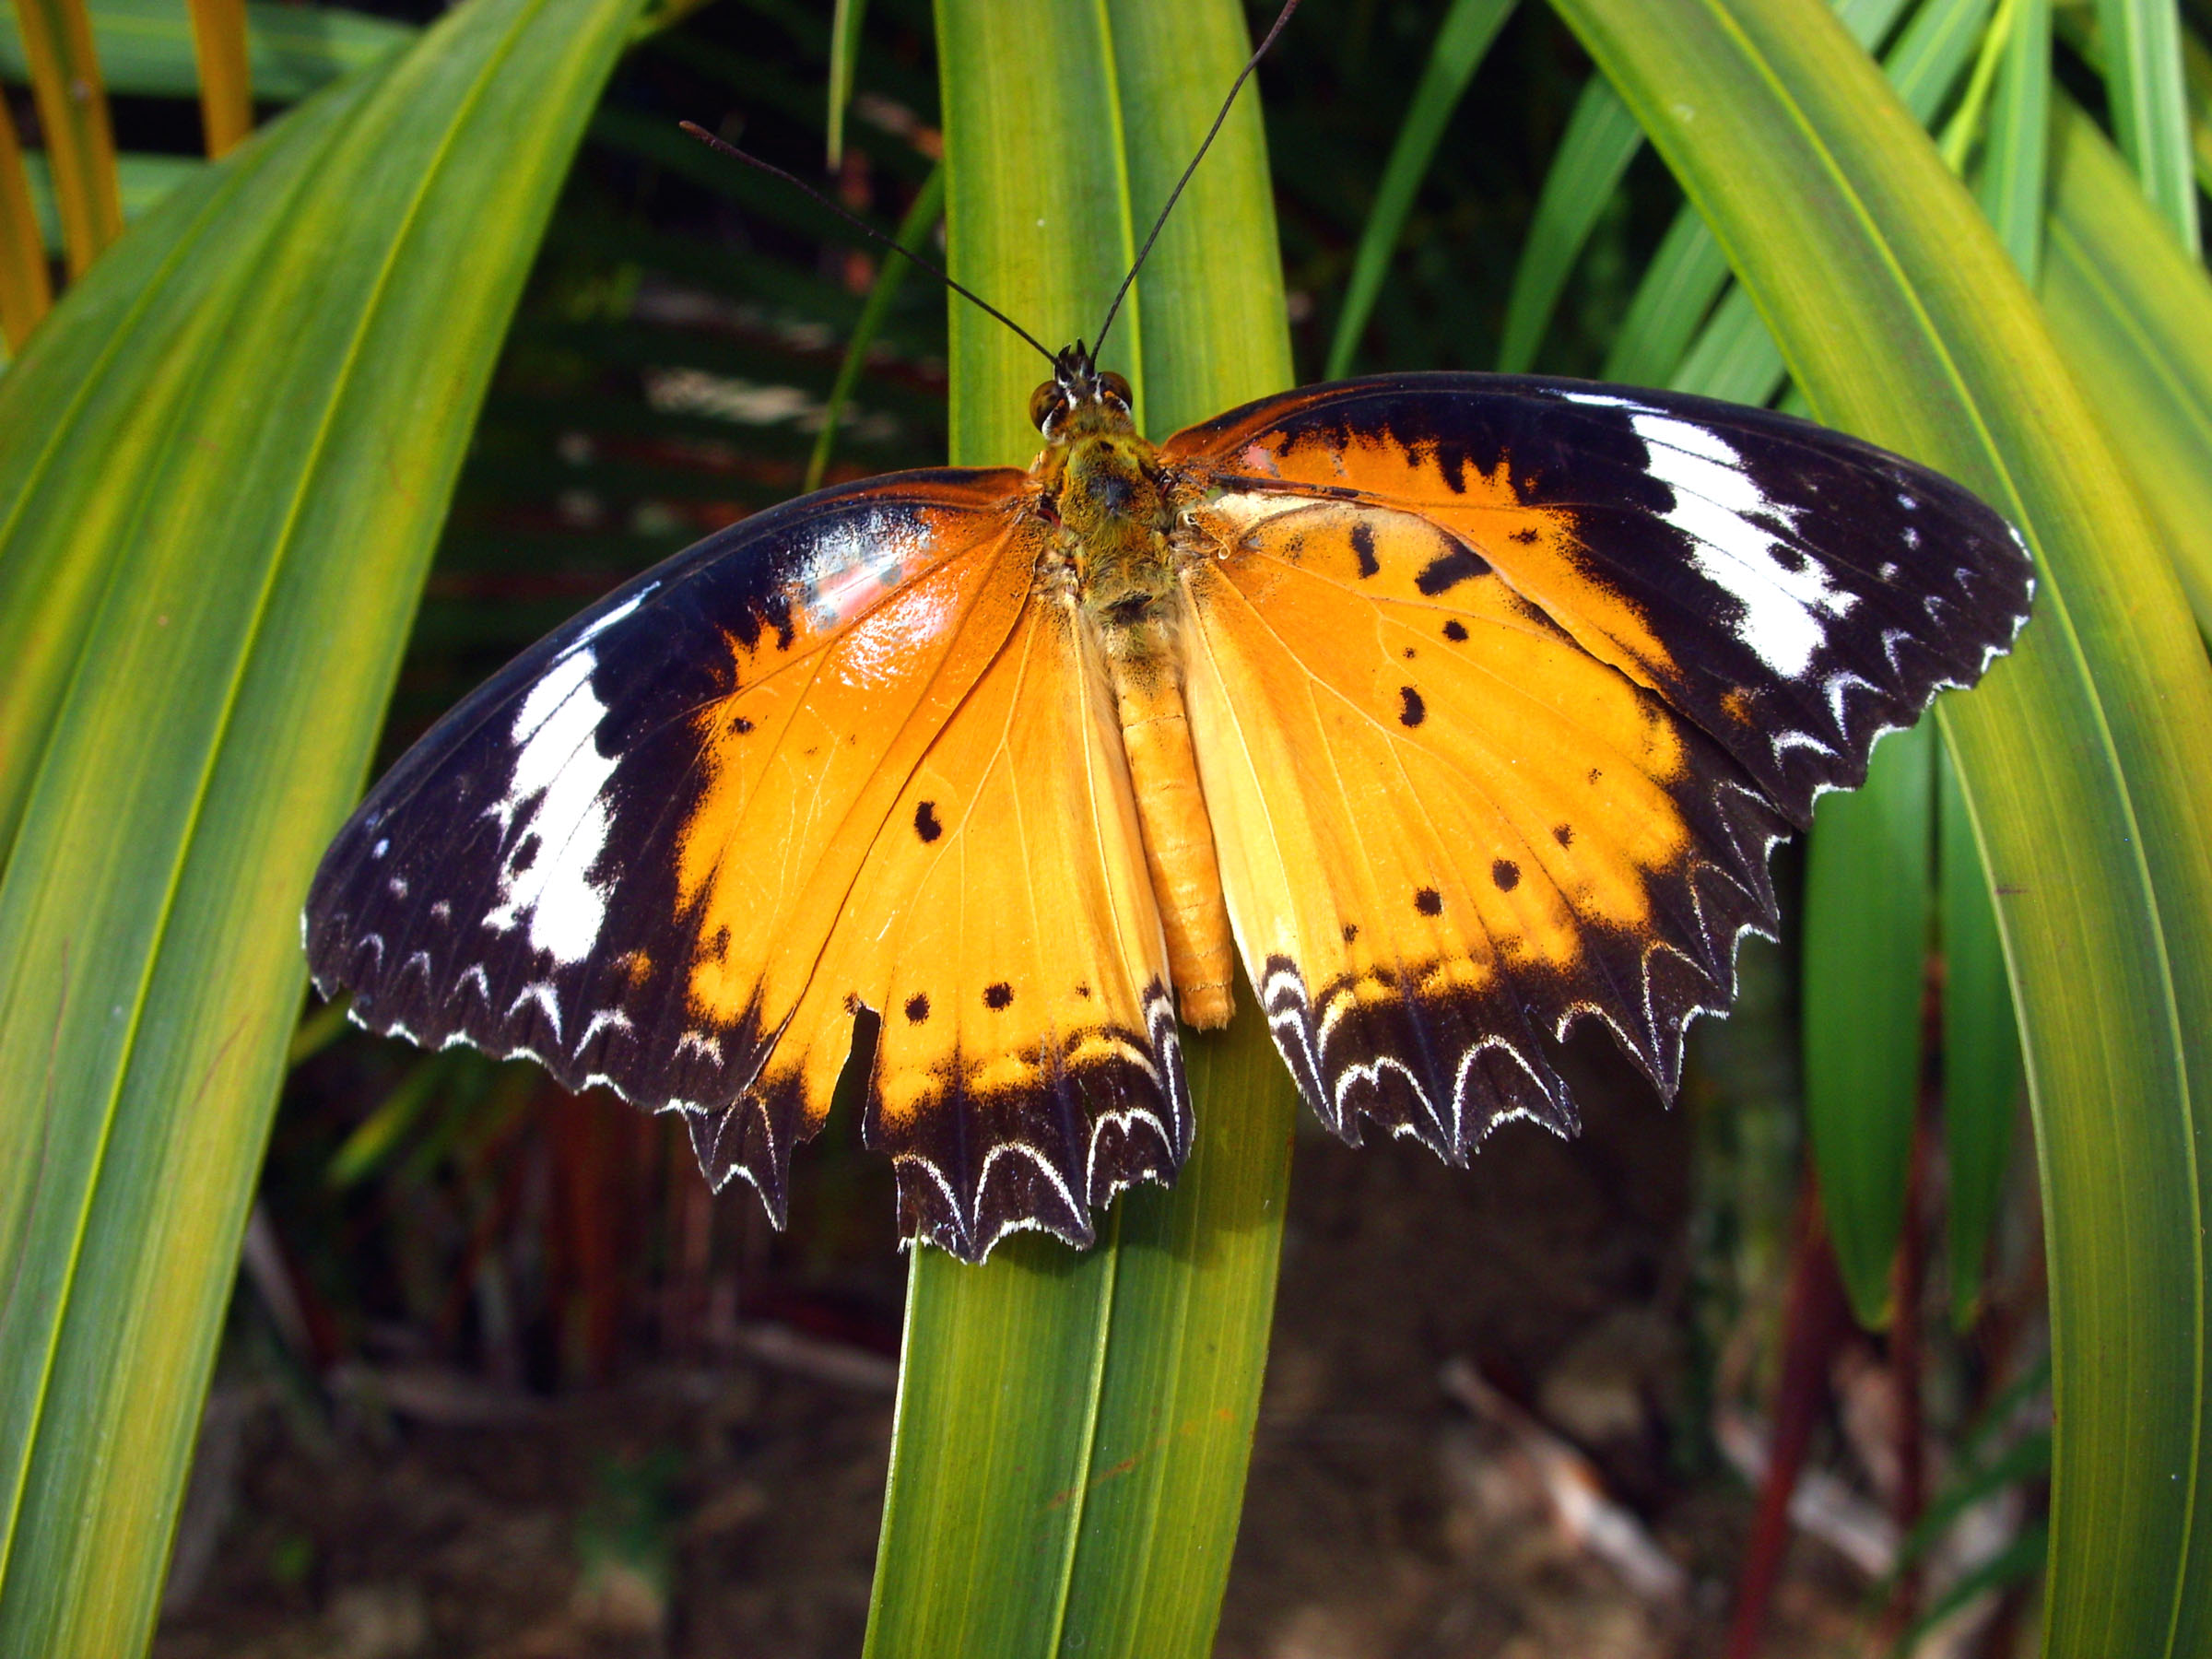 Orange Lacewing butterfly, Butterfly, Insect, Thai, Thailand, HQ Photo